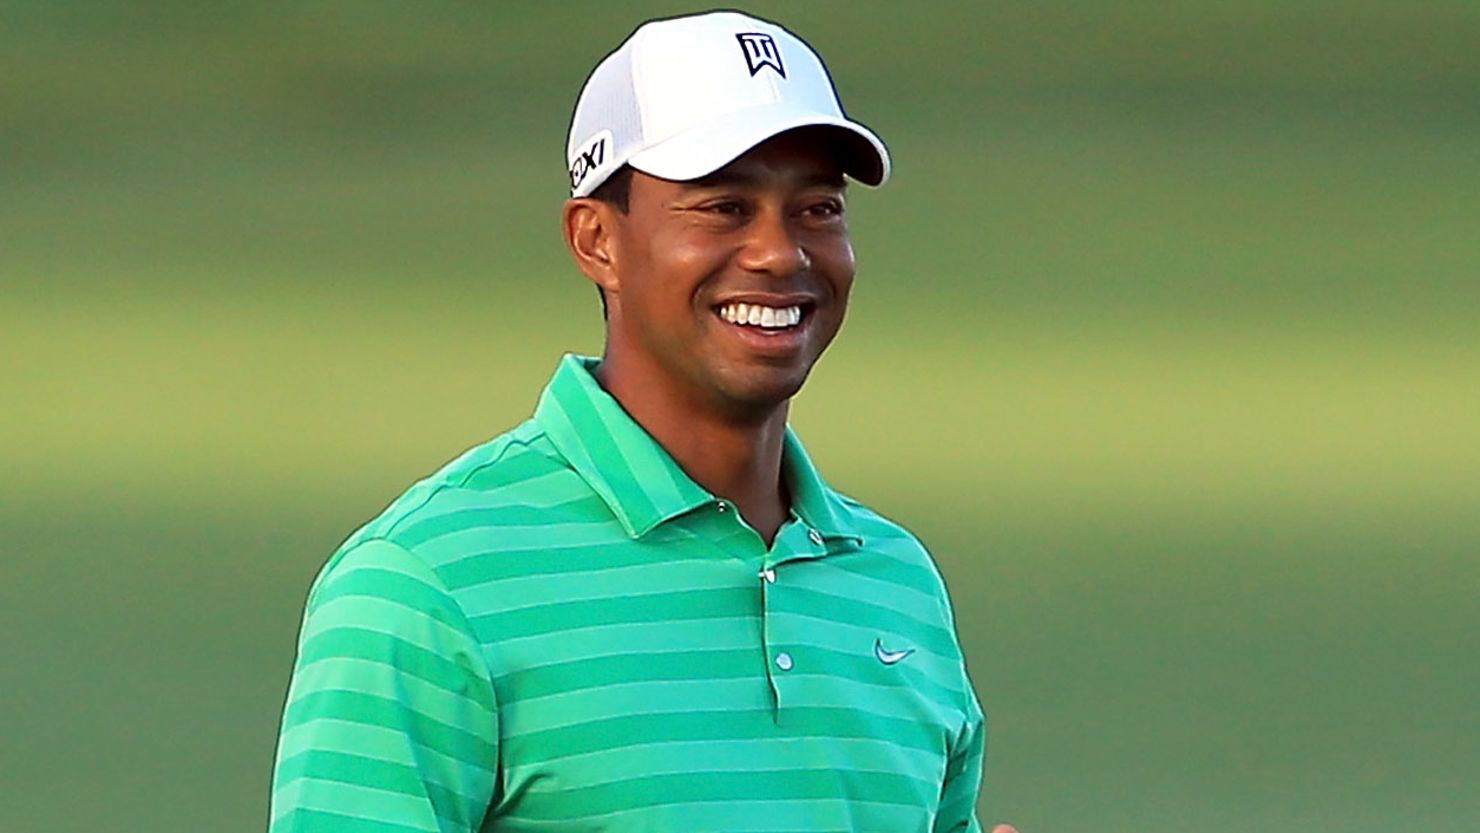 Former world No.1 Tiger Woods withdrew from the recent WGC event at Doral with an Achilles injury.